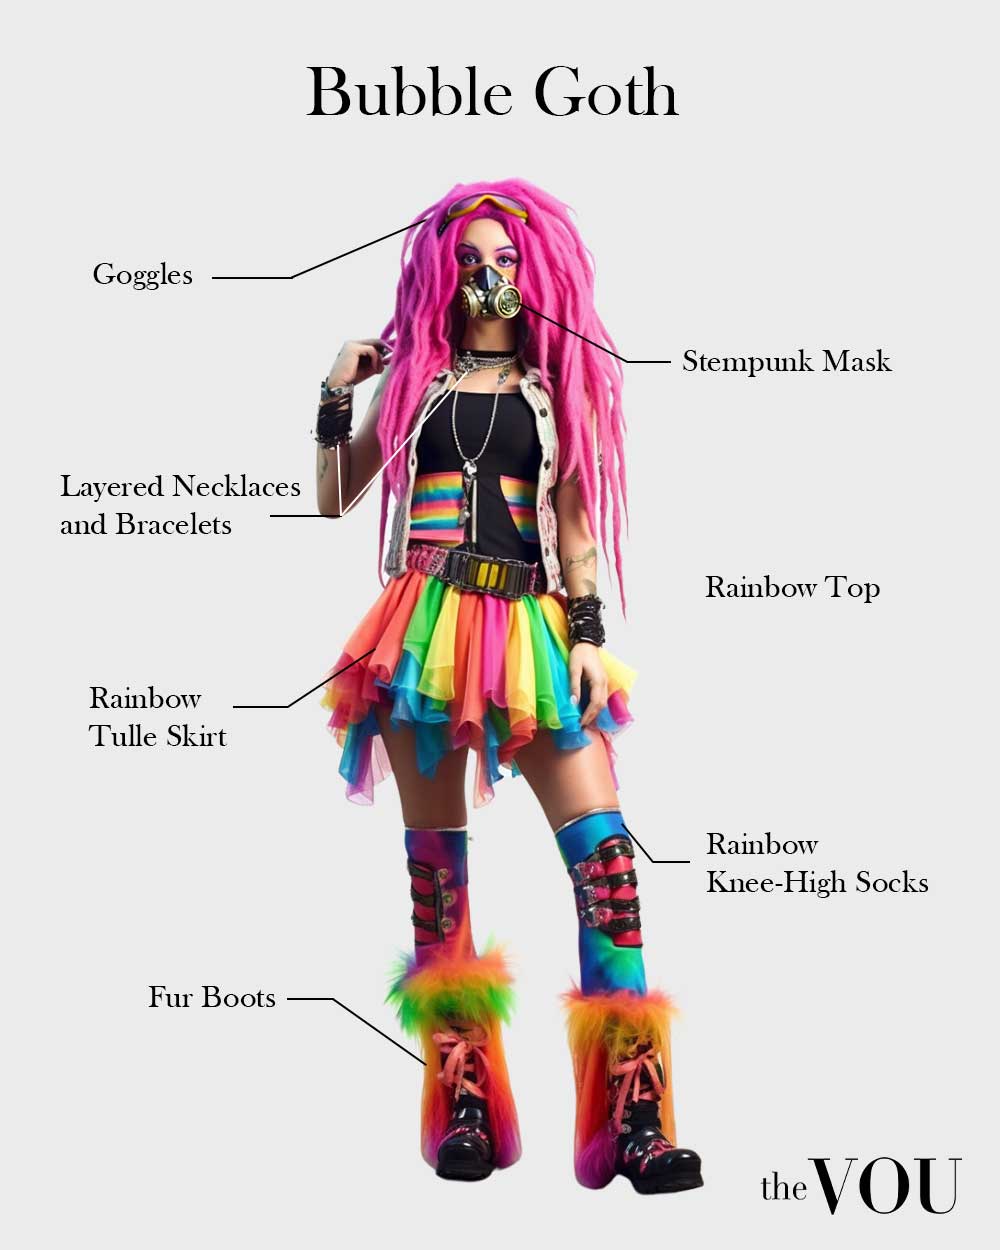 Bubble Goth outfit elements 